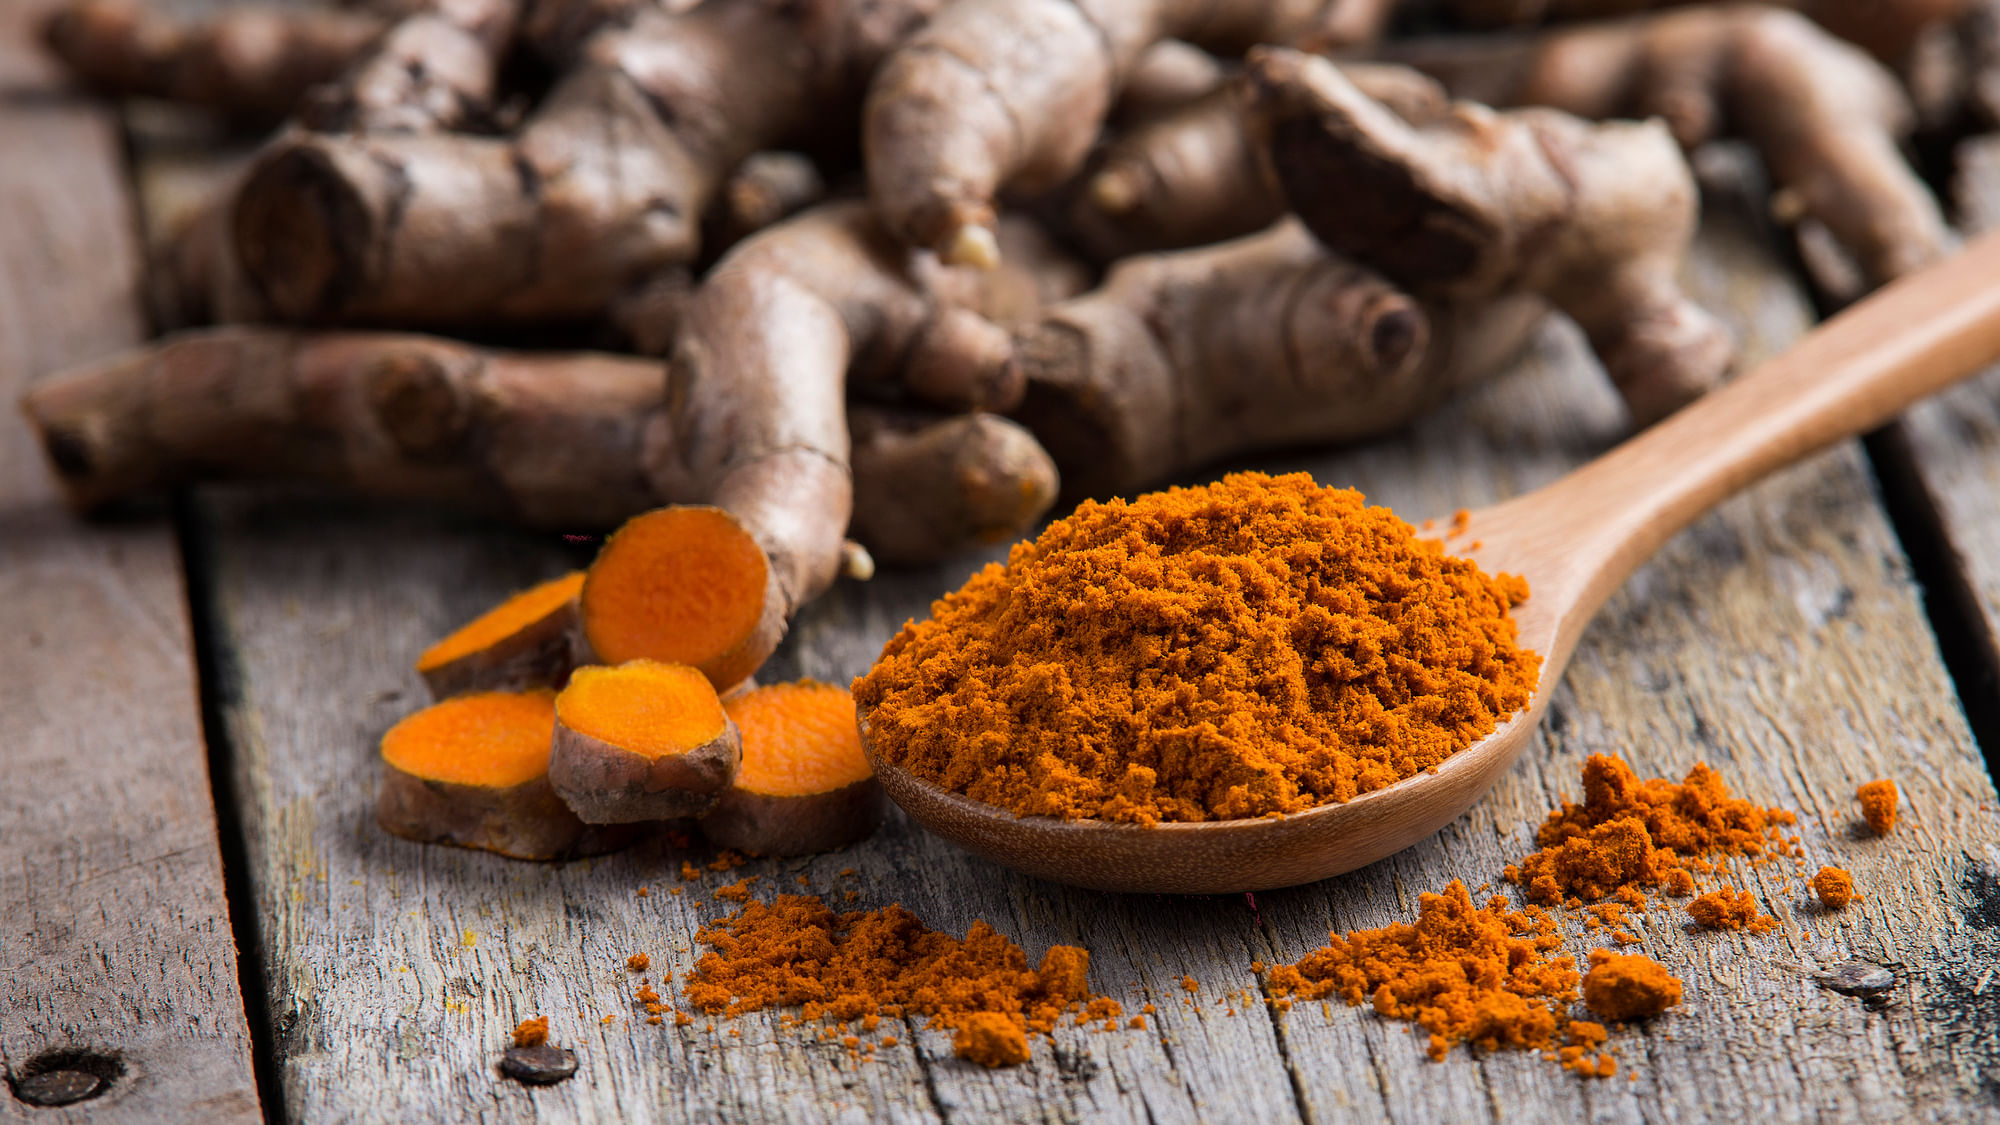 A new drug delivery system using curcumin successfully inhibits the growth of bone cancer cells.